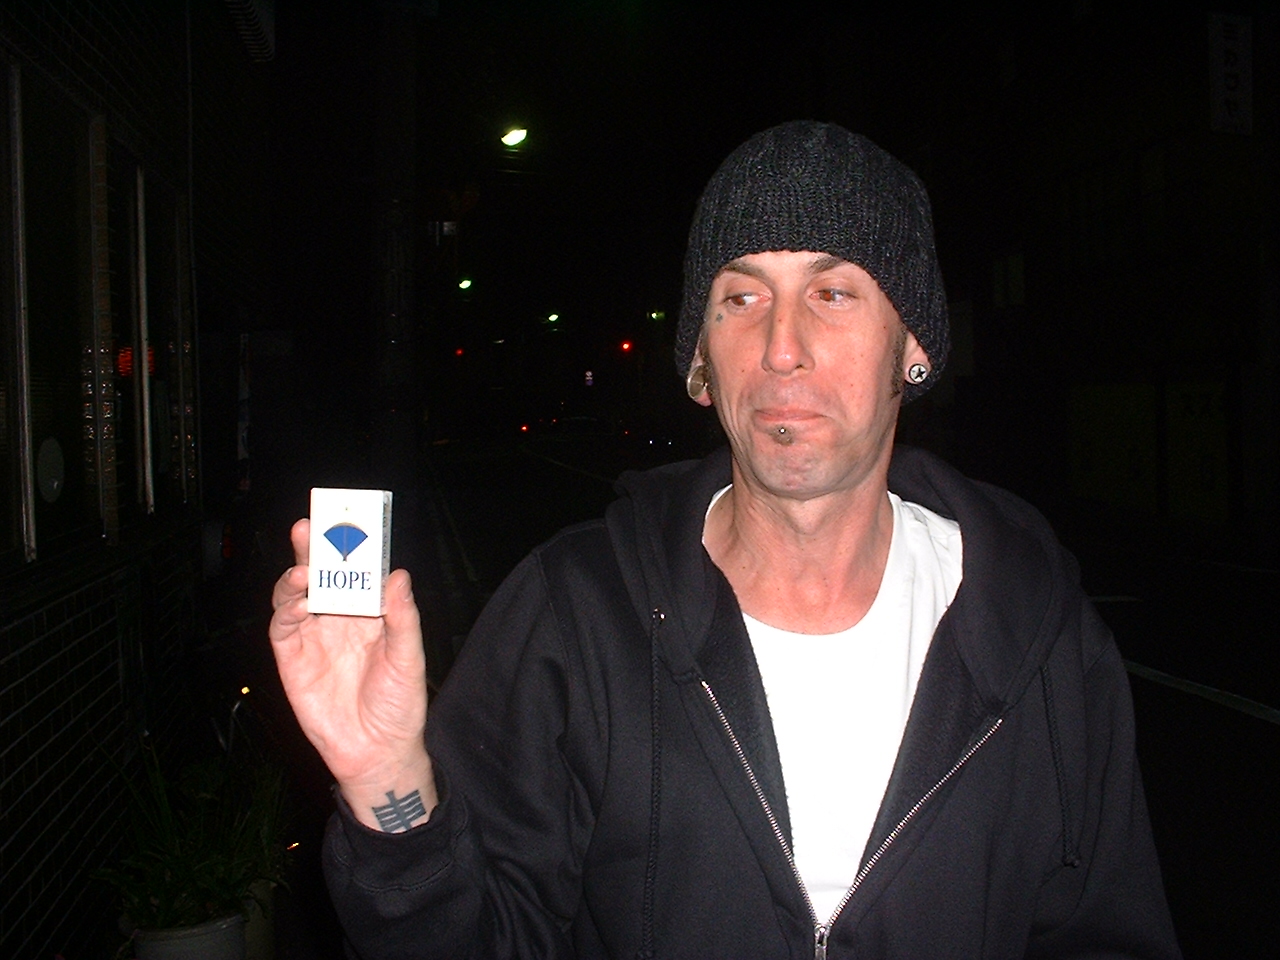 a caucasian man gimaces as he holds up a pack of cigarettes called hope